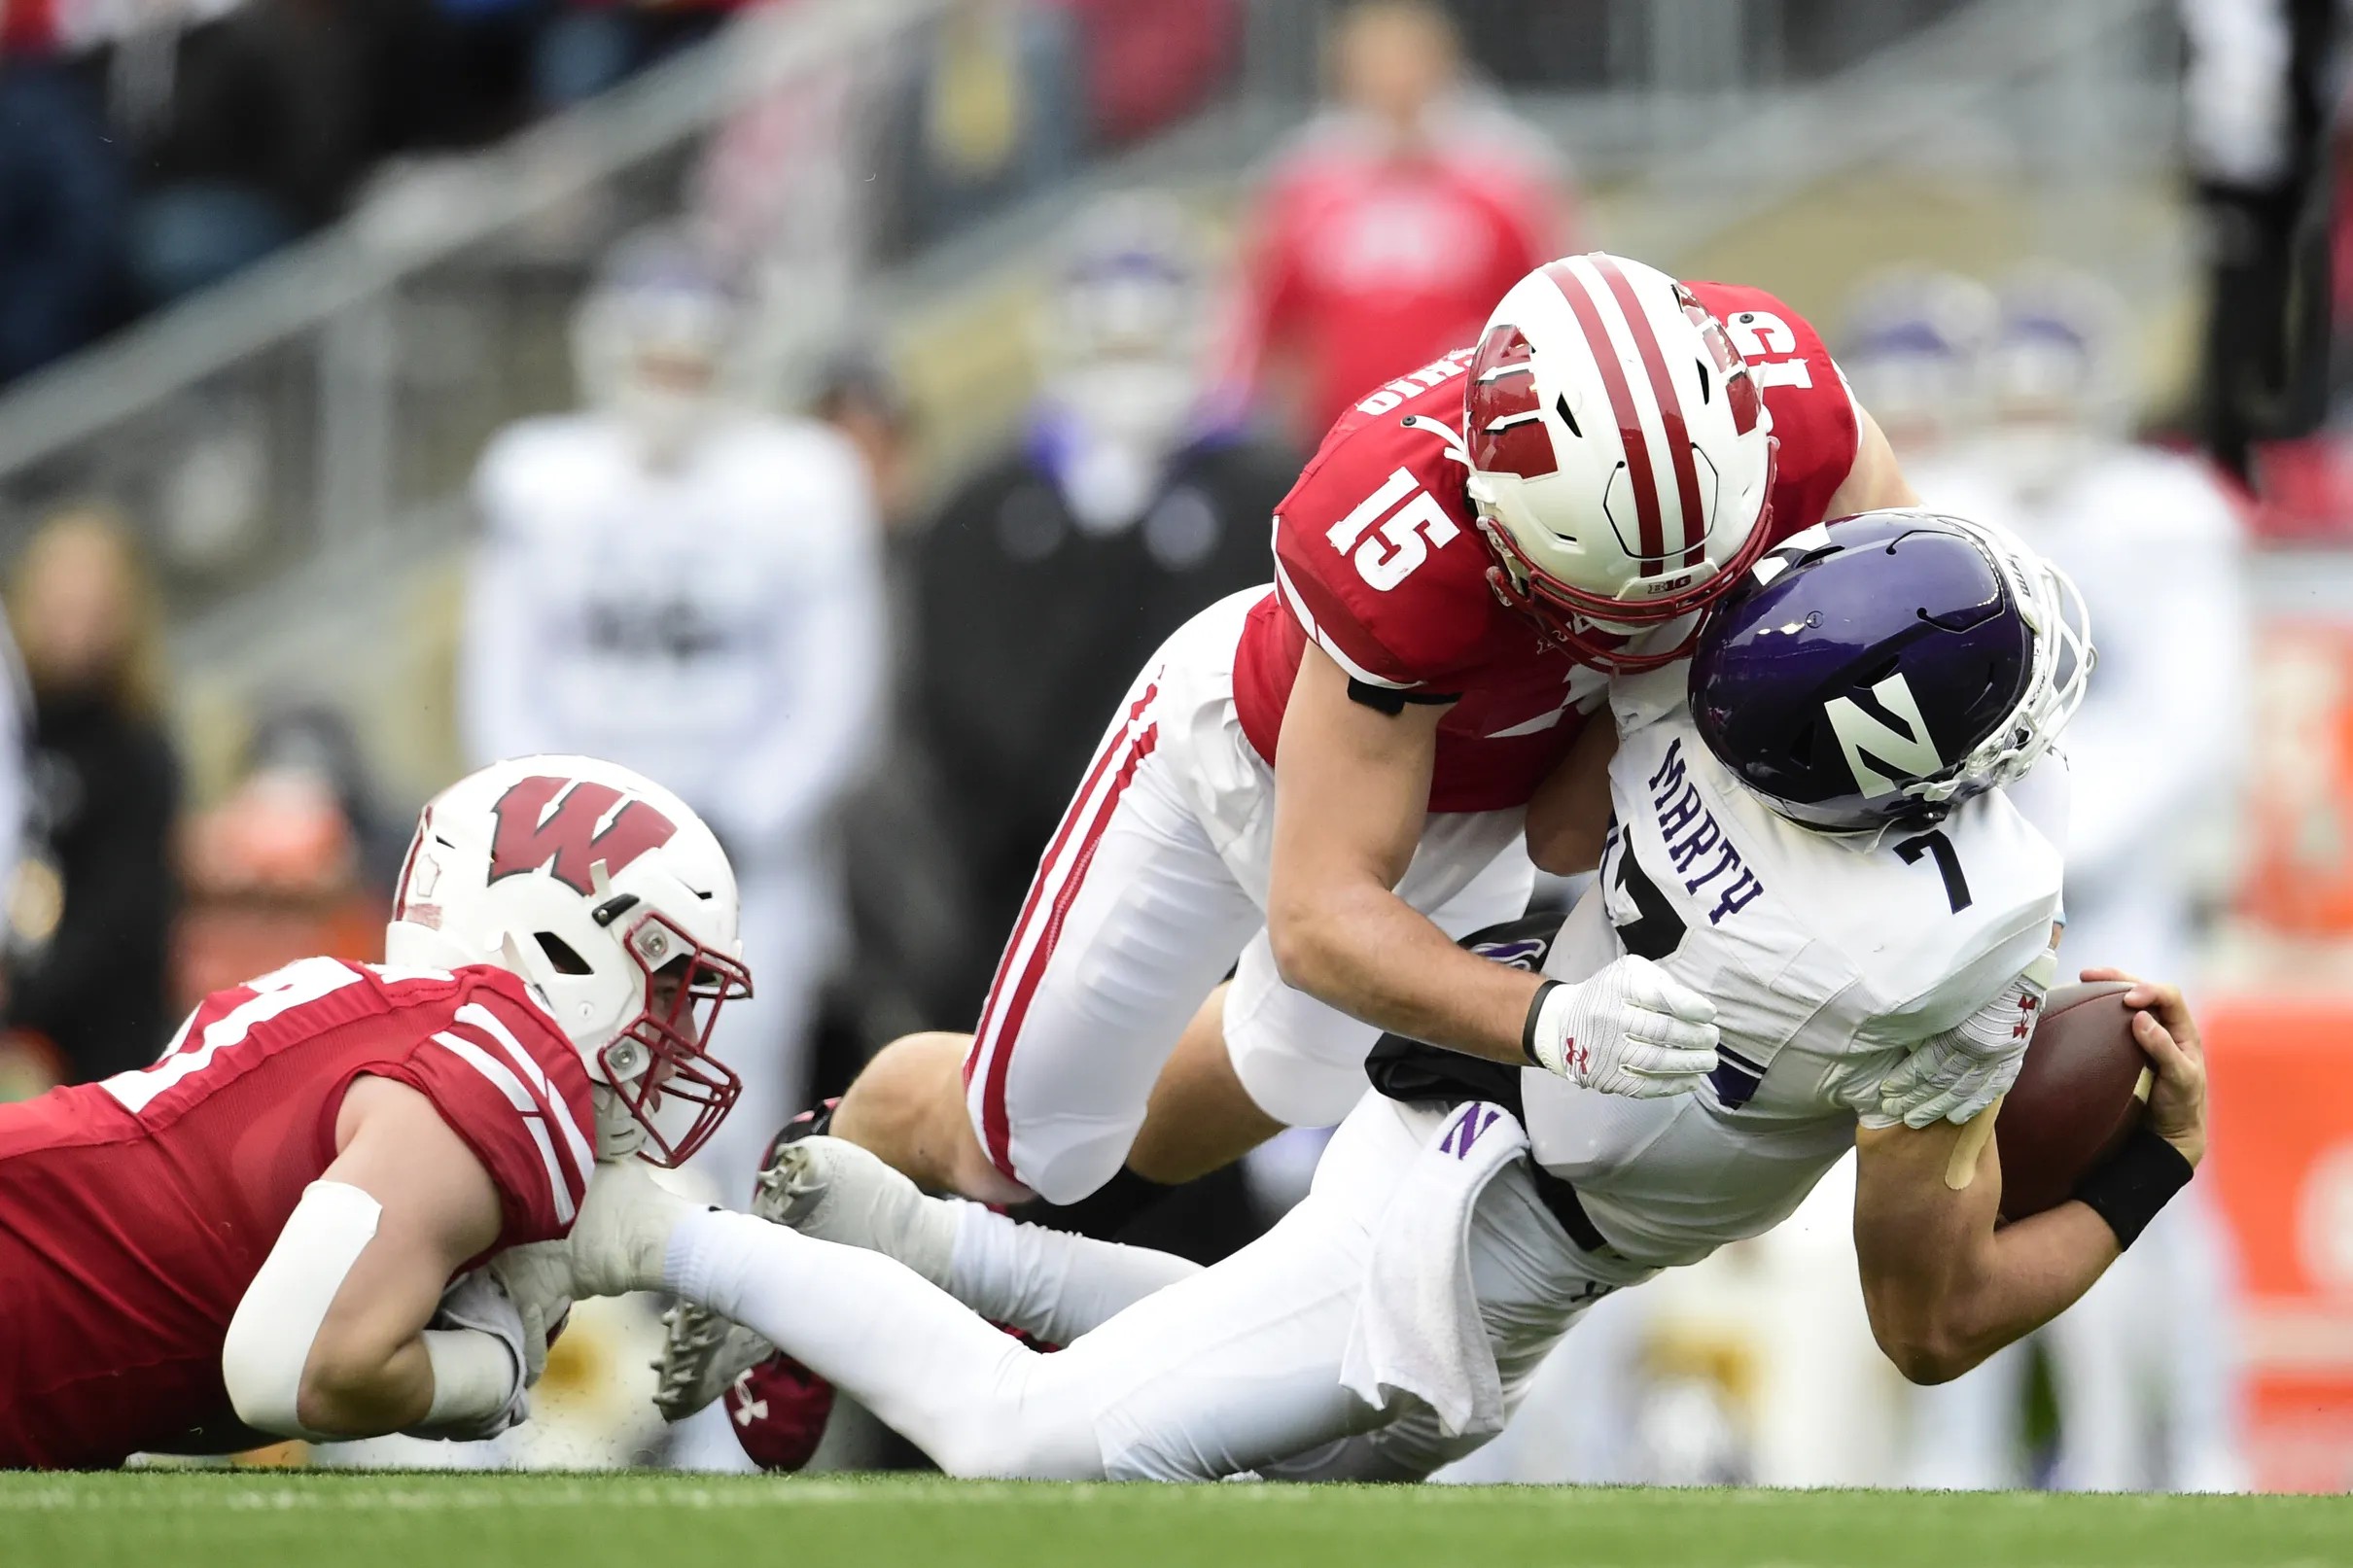 Wisconsin football depth chart released for the Las Vegas Bowl